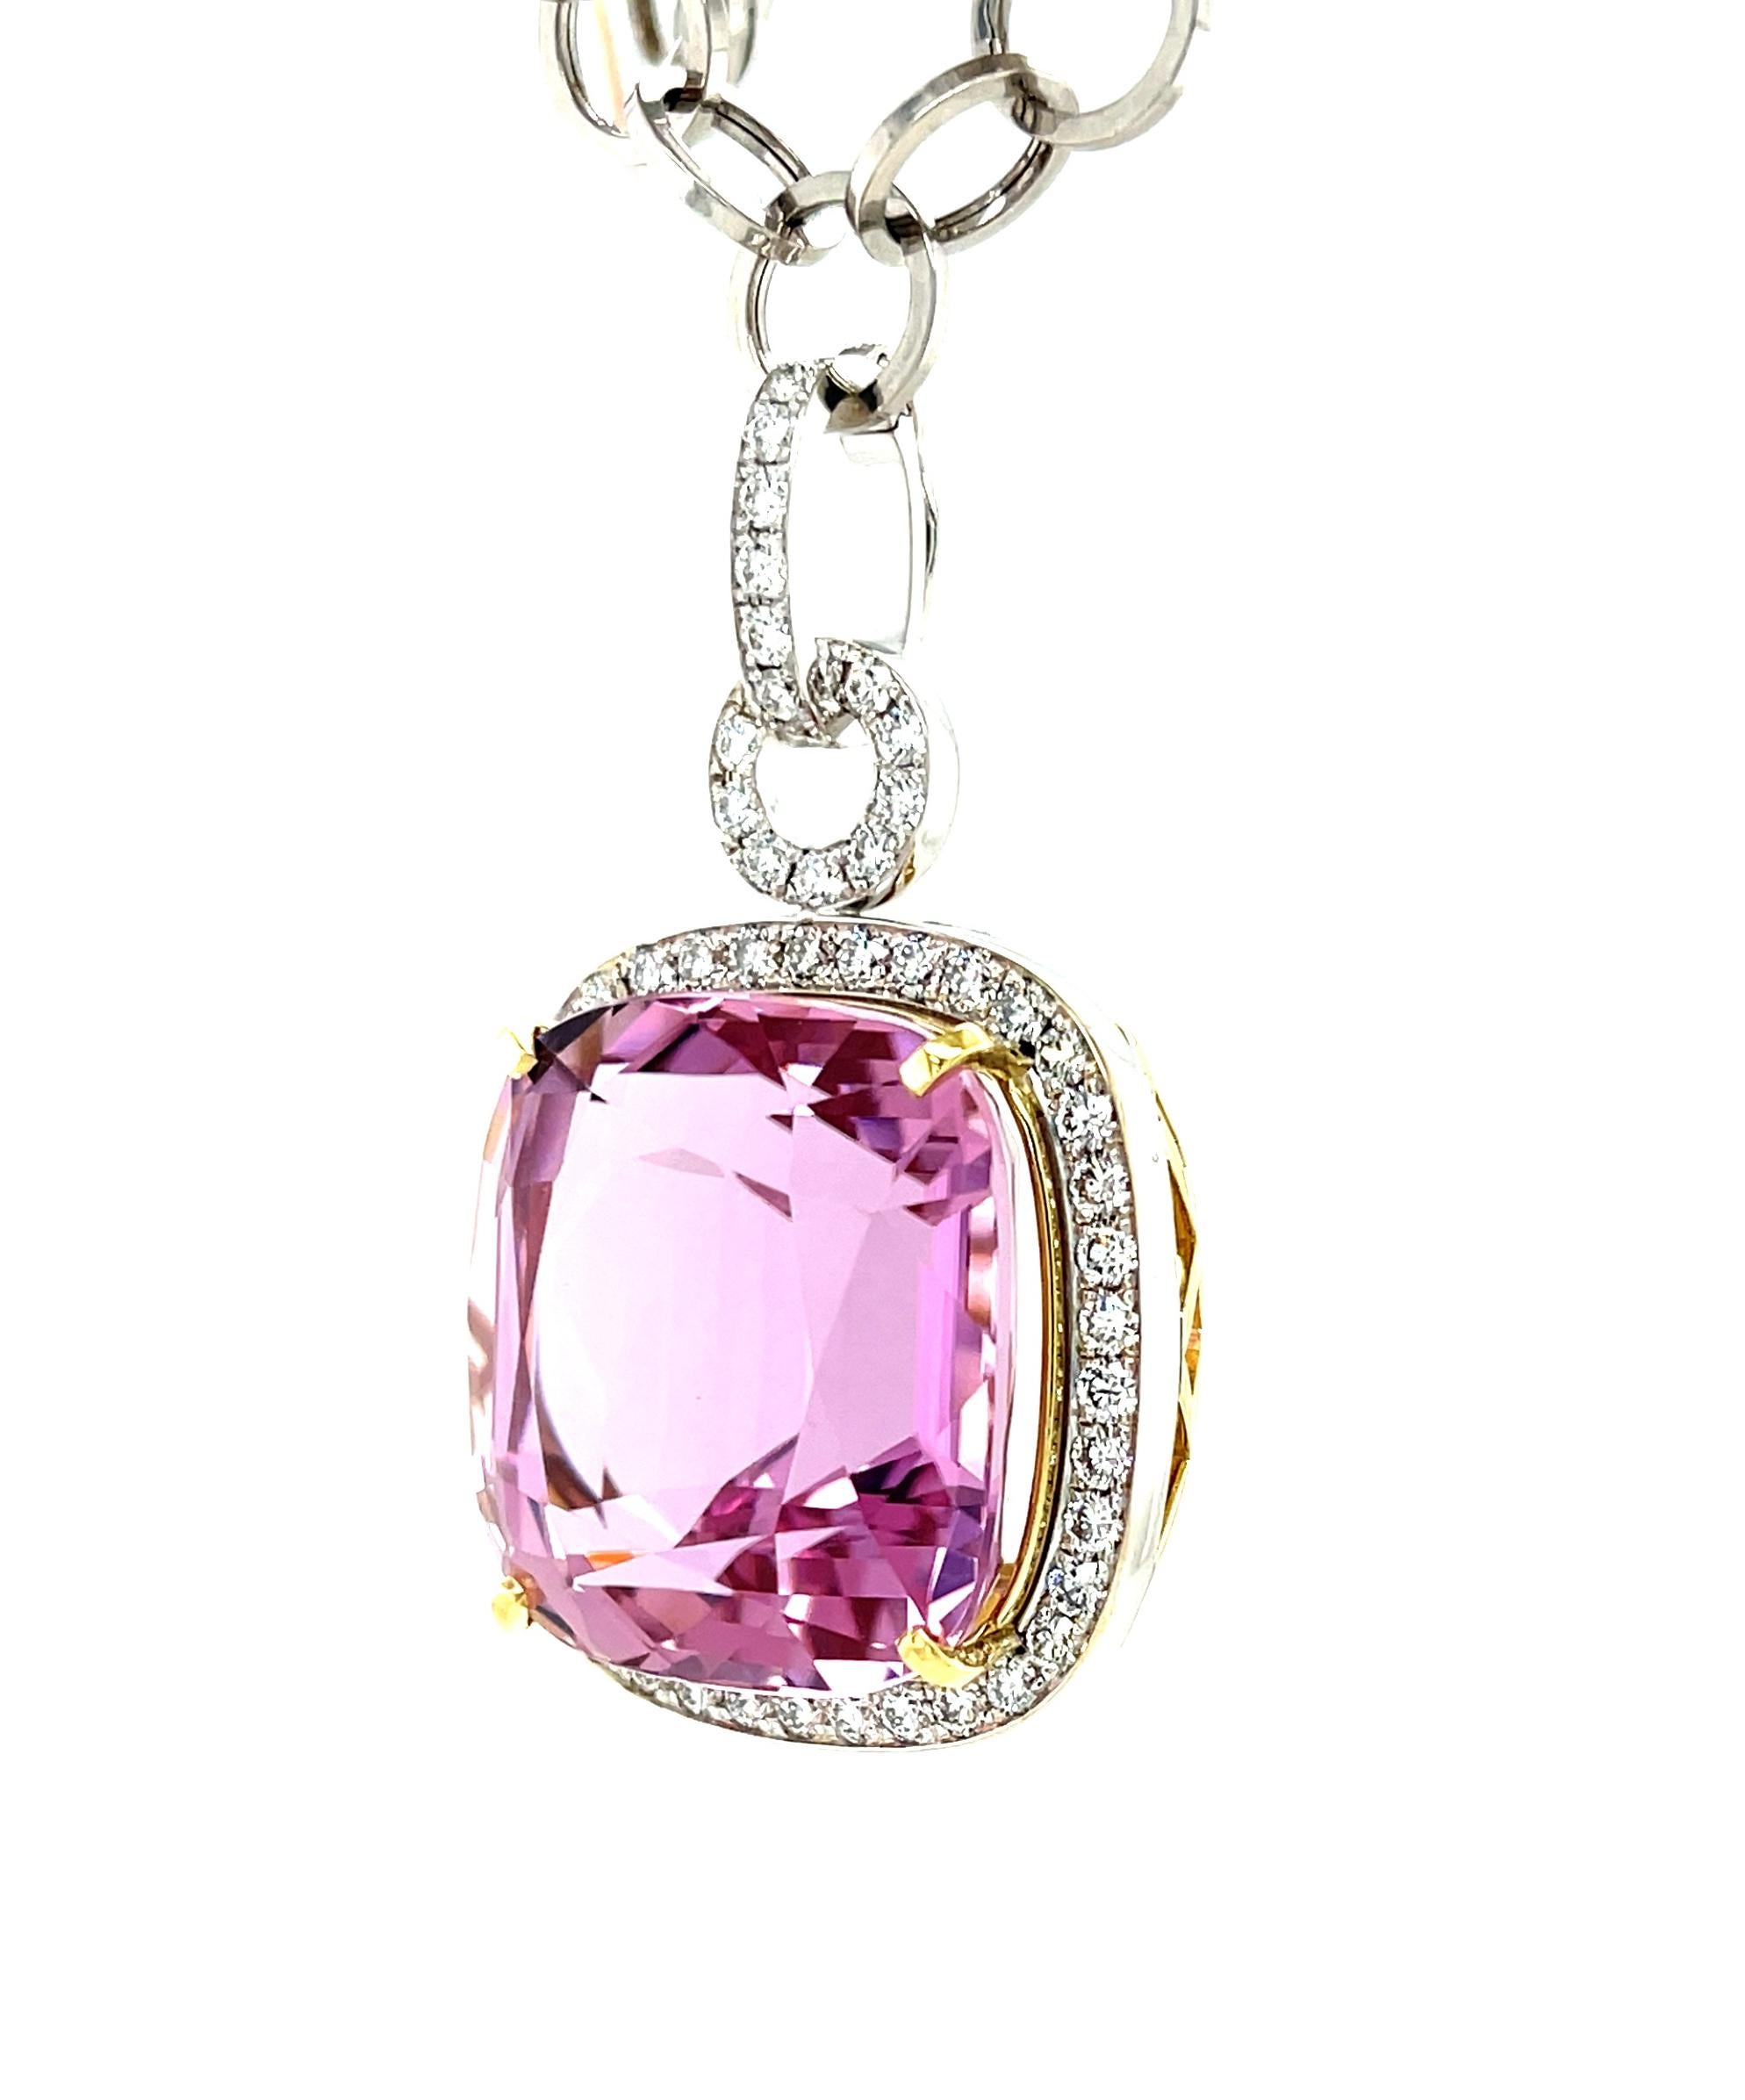 Cushion Cut 61.26 Carat Kunzite and Diamond Pendant Enhancer in 18k White and Yellow Gold For Sale